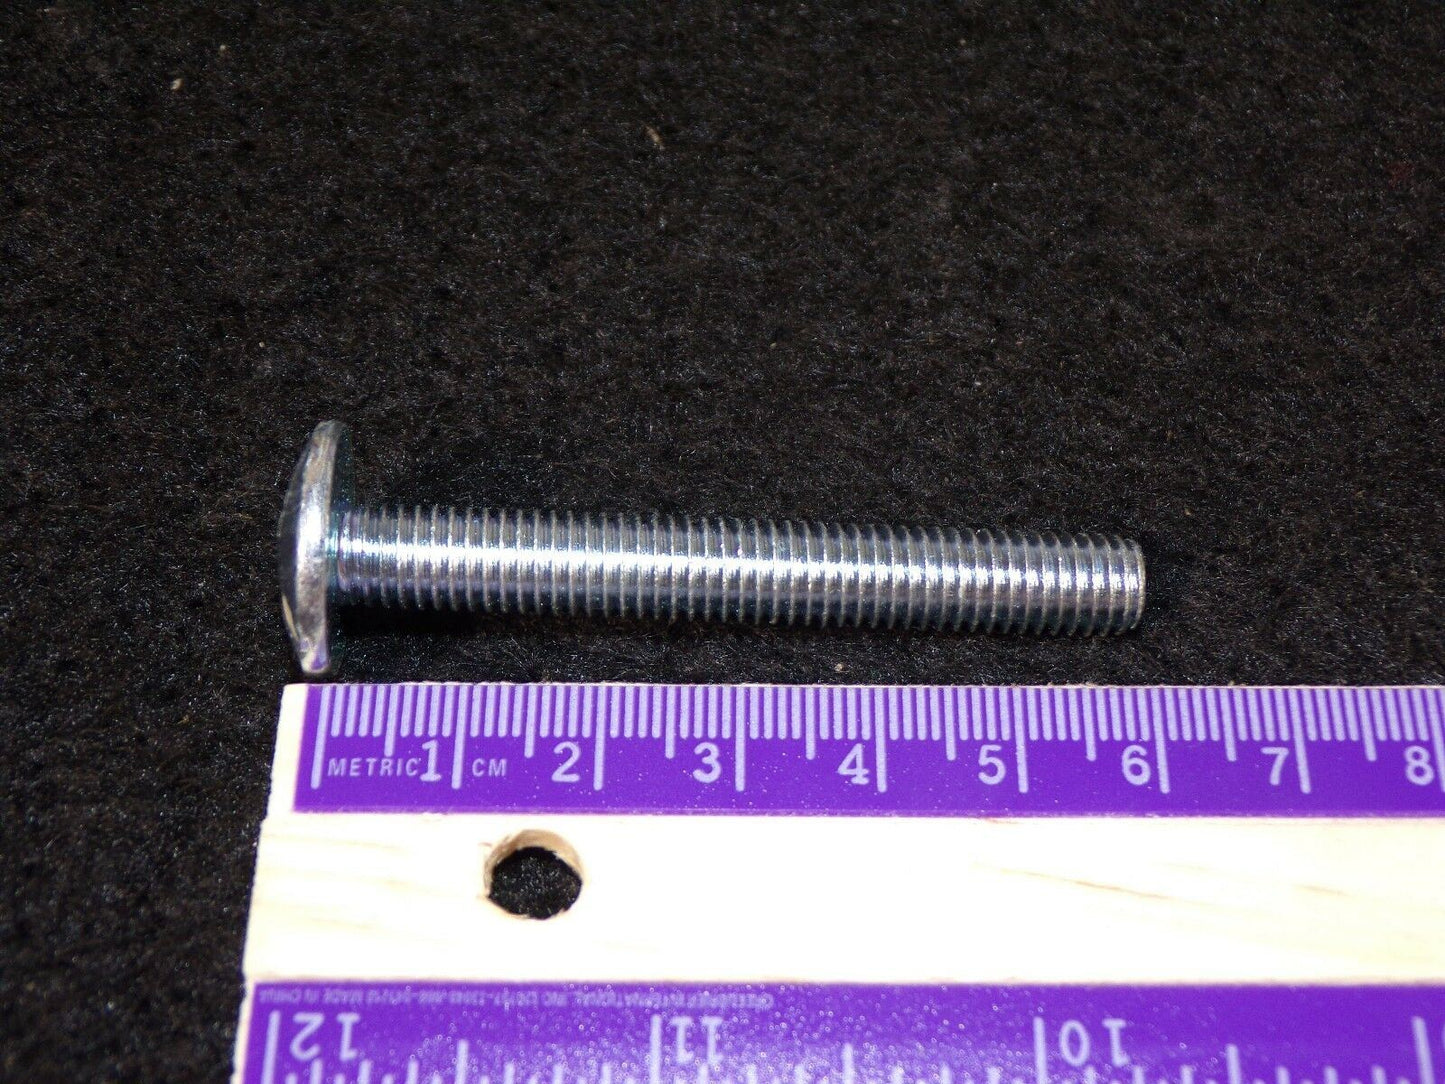 Duratool M8 x 60mm Roofing Bolt and Nut FNO1647 QTY-25 (183335728825-2F19)